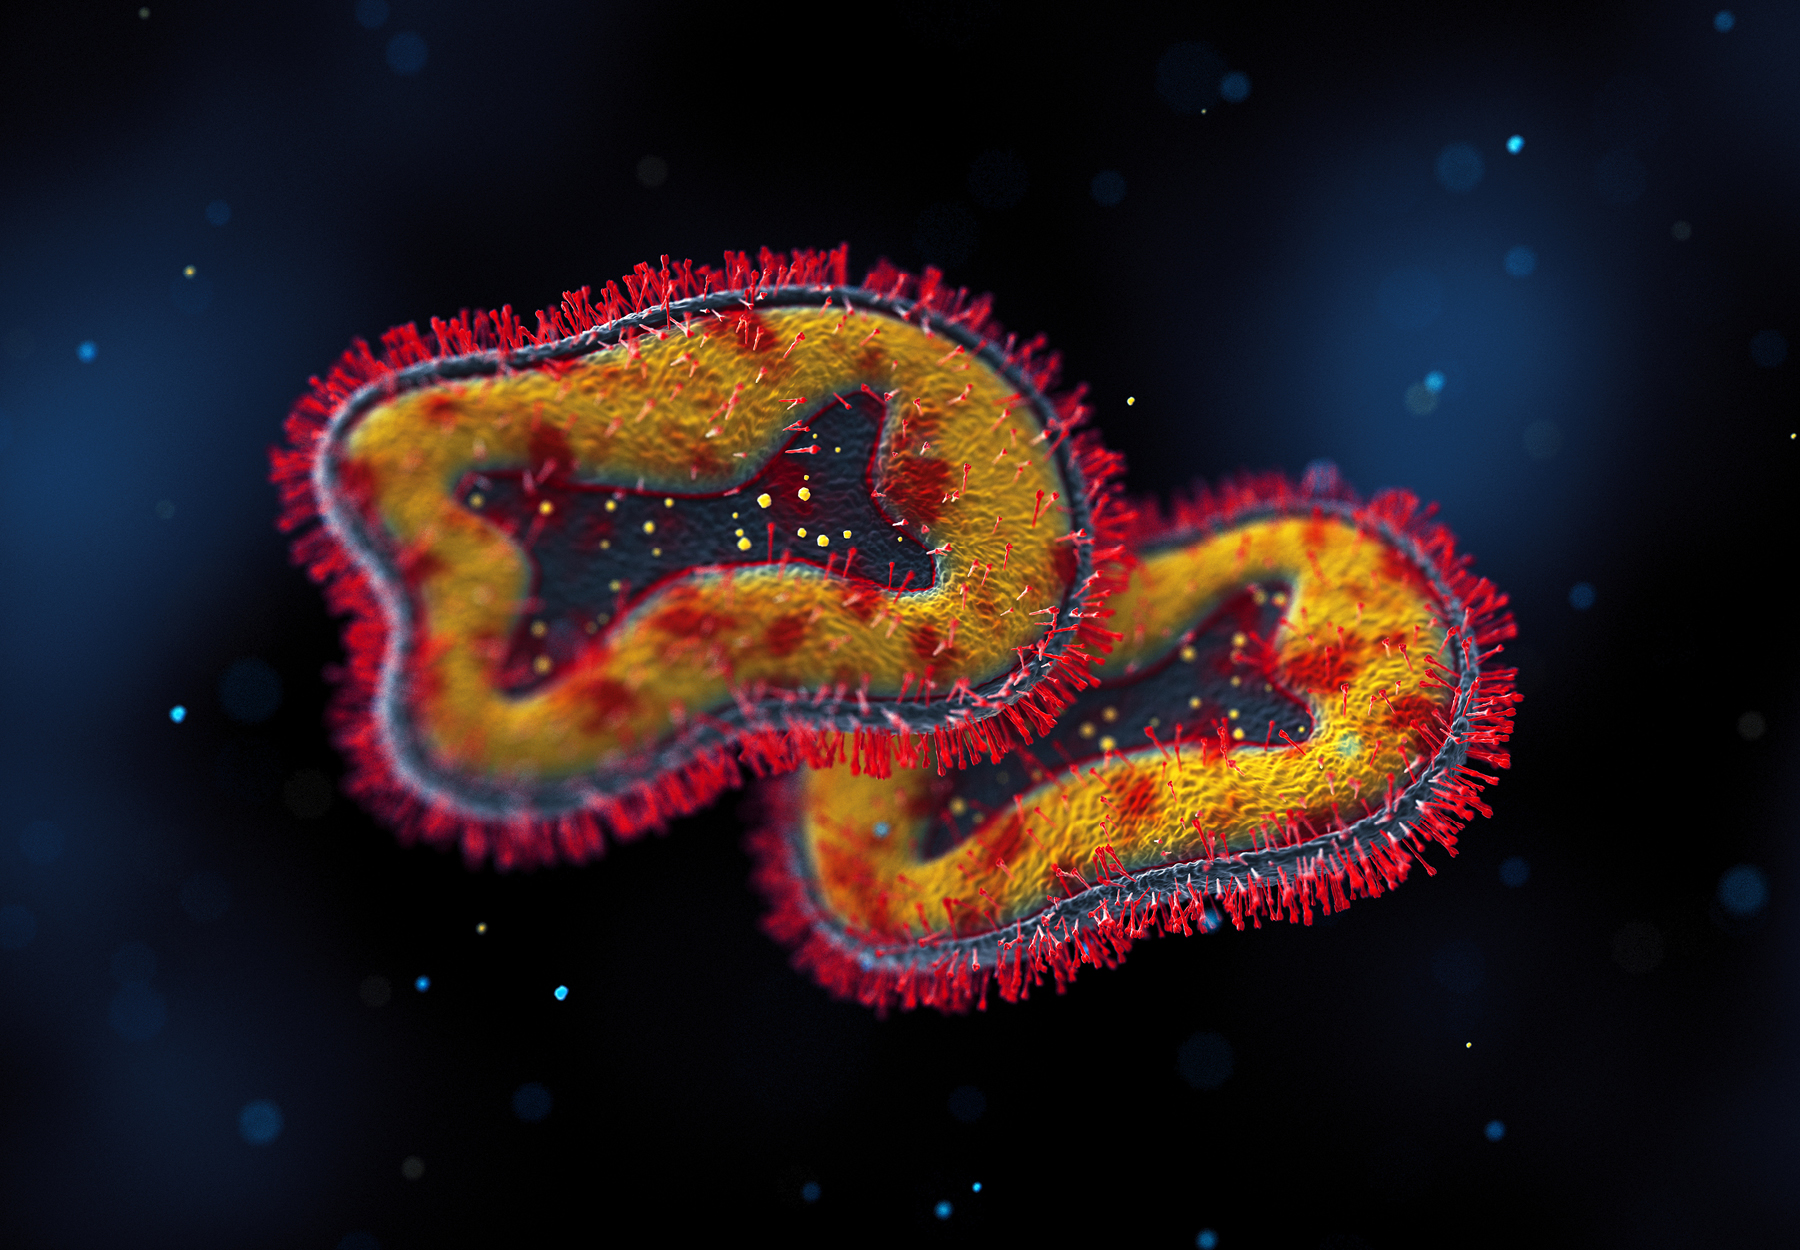 Yellow and red illustration of monkeypox virus on a dark blue background. Stock image.